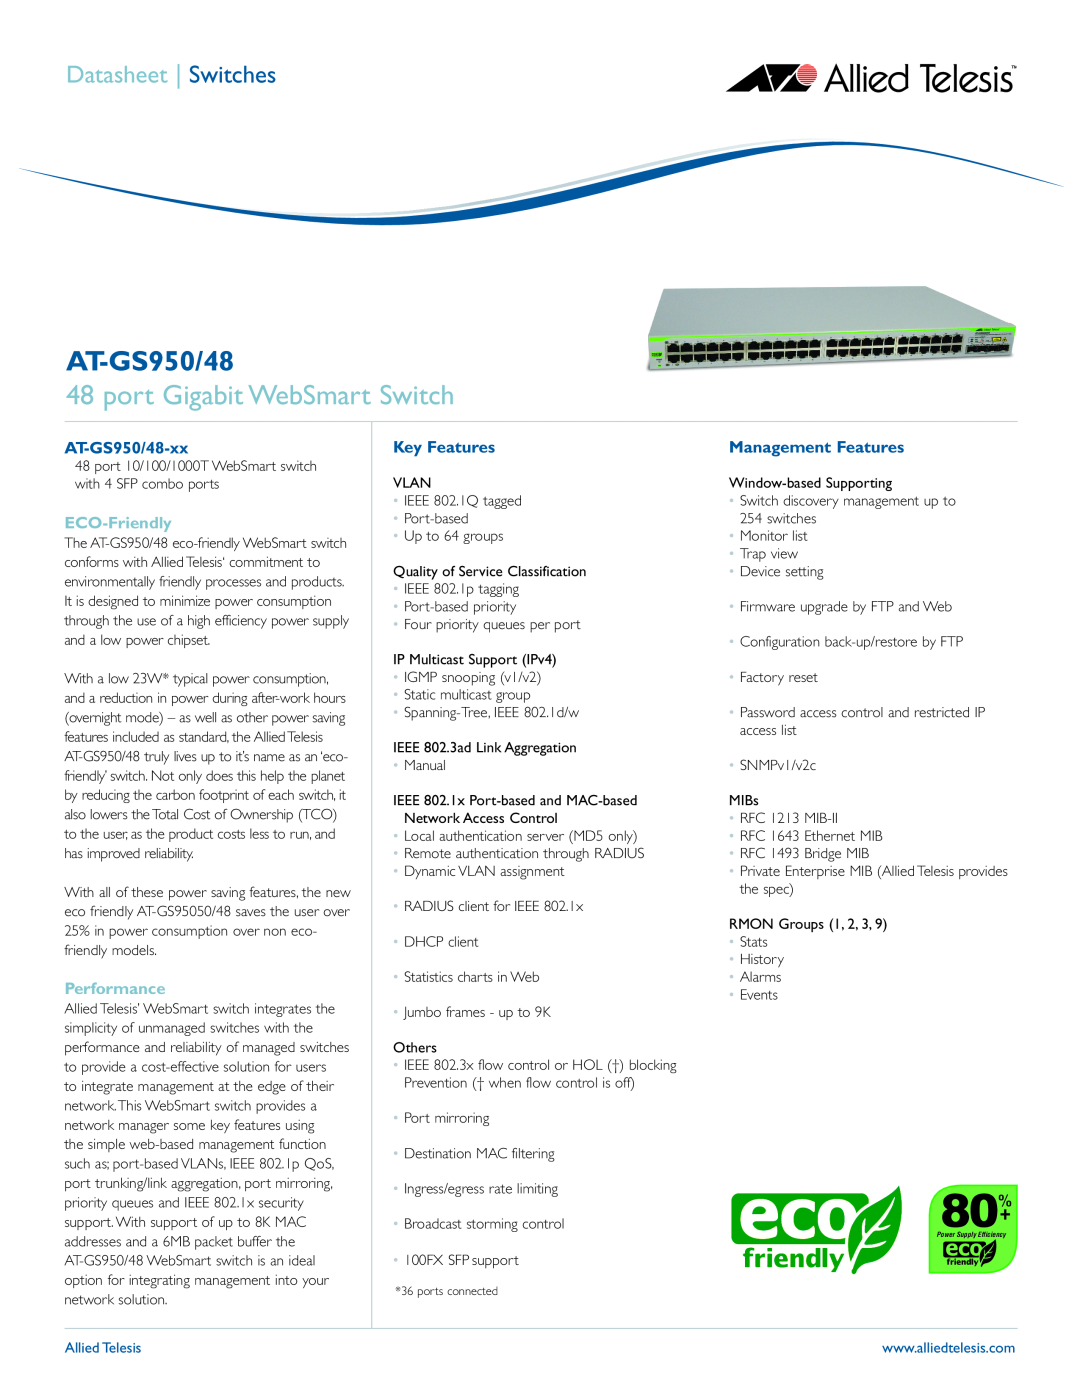 Allied Telesis manual port Gigabit WebSmart Switch, AT-GS950/48-xx, ECO-Friendly, Performance, Key Features 